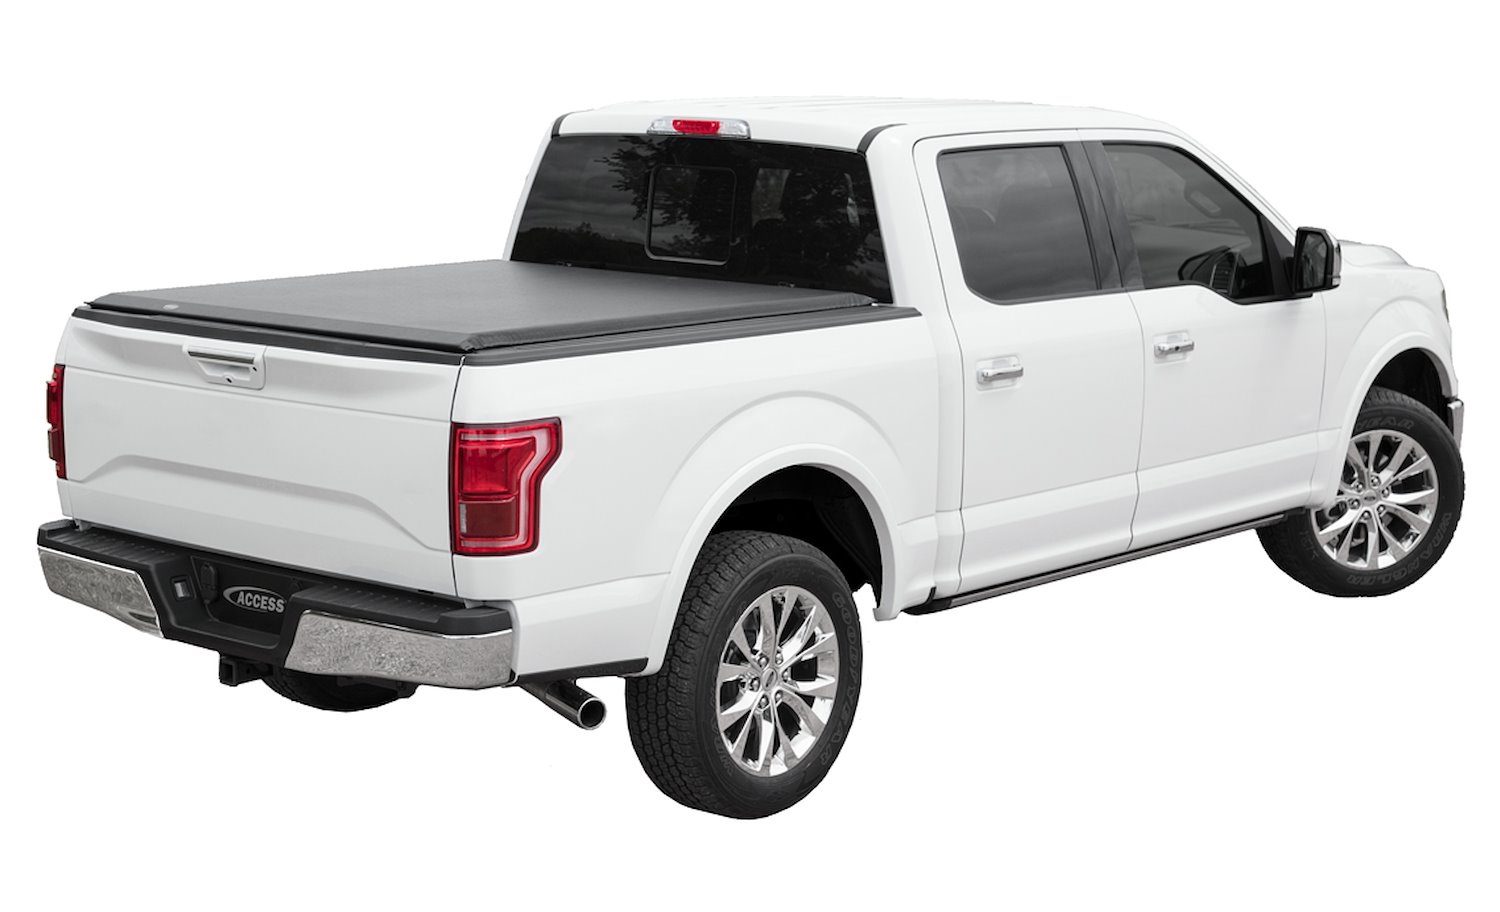 Original Roll-Up Tonneau Cover, 2008-2016 Ford F-250/F-350, with